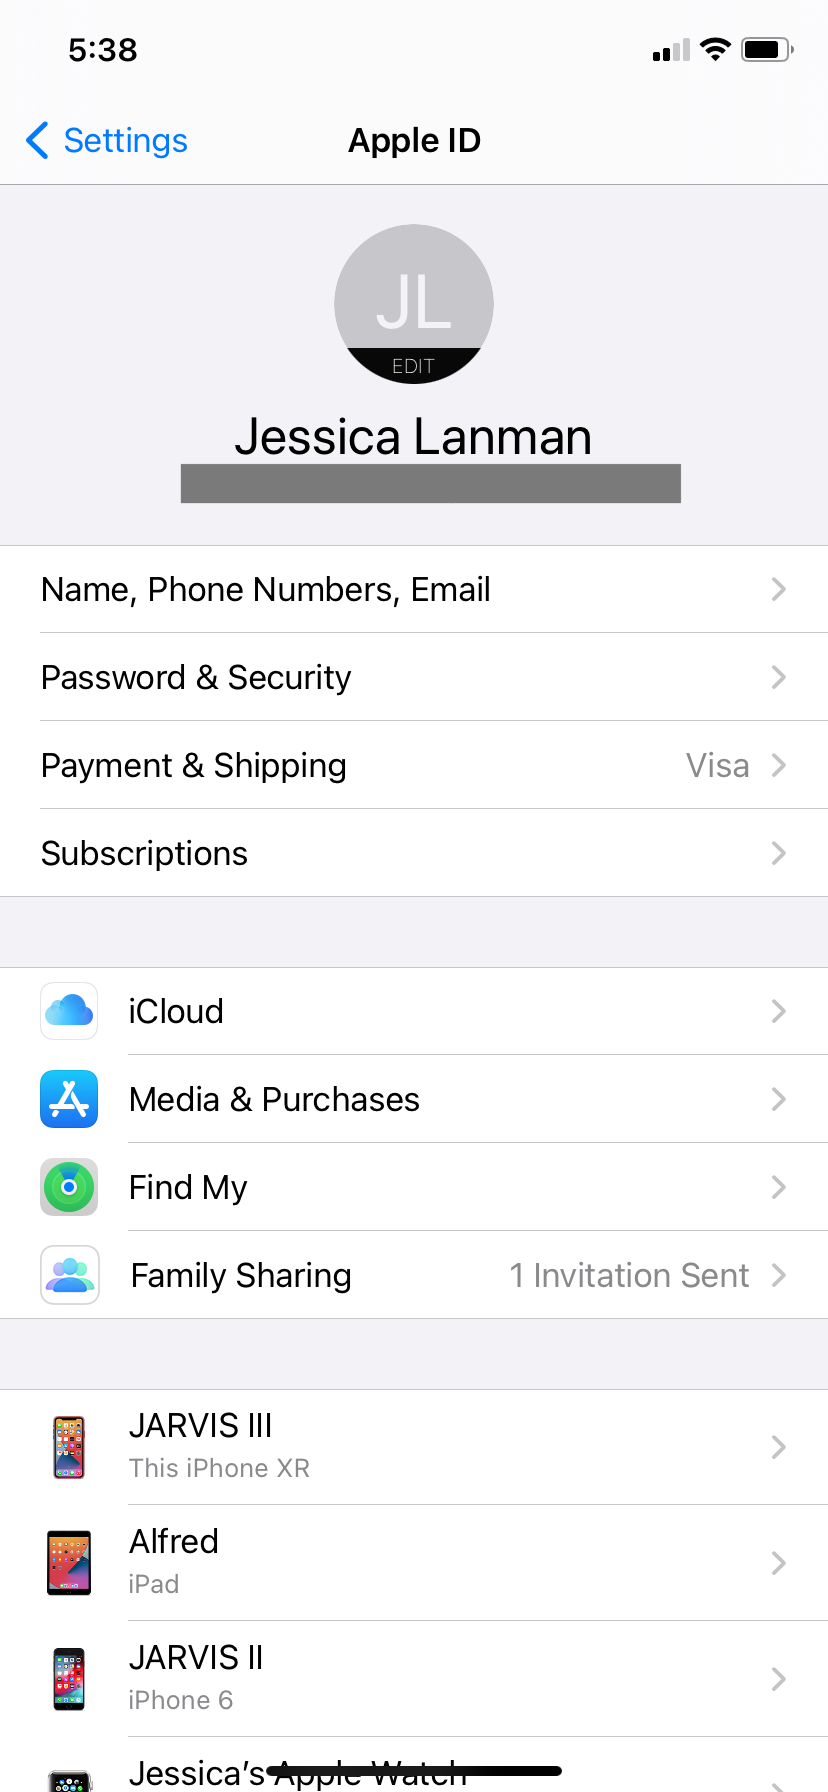 The Apple ID page in the Settings of an iPhone XR